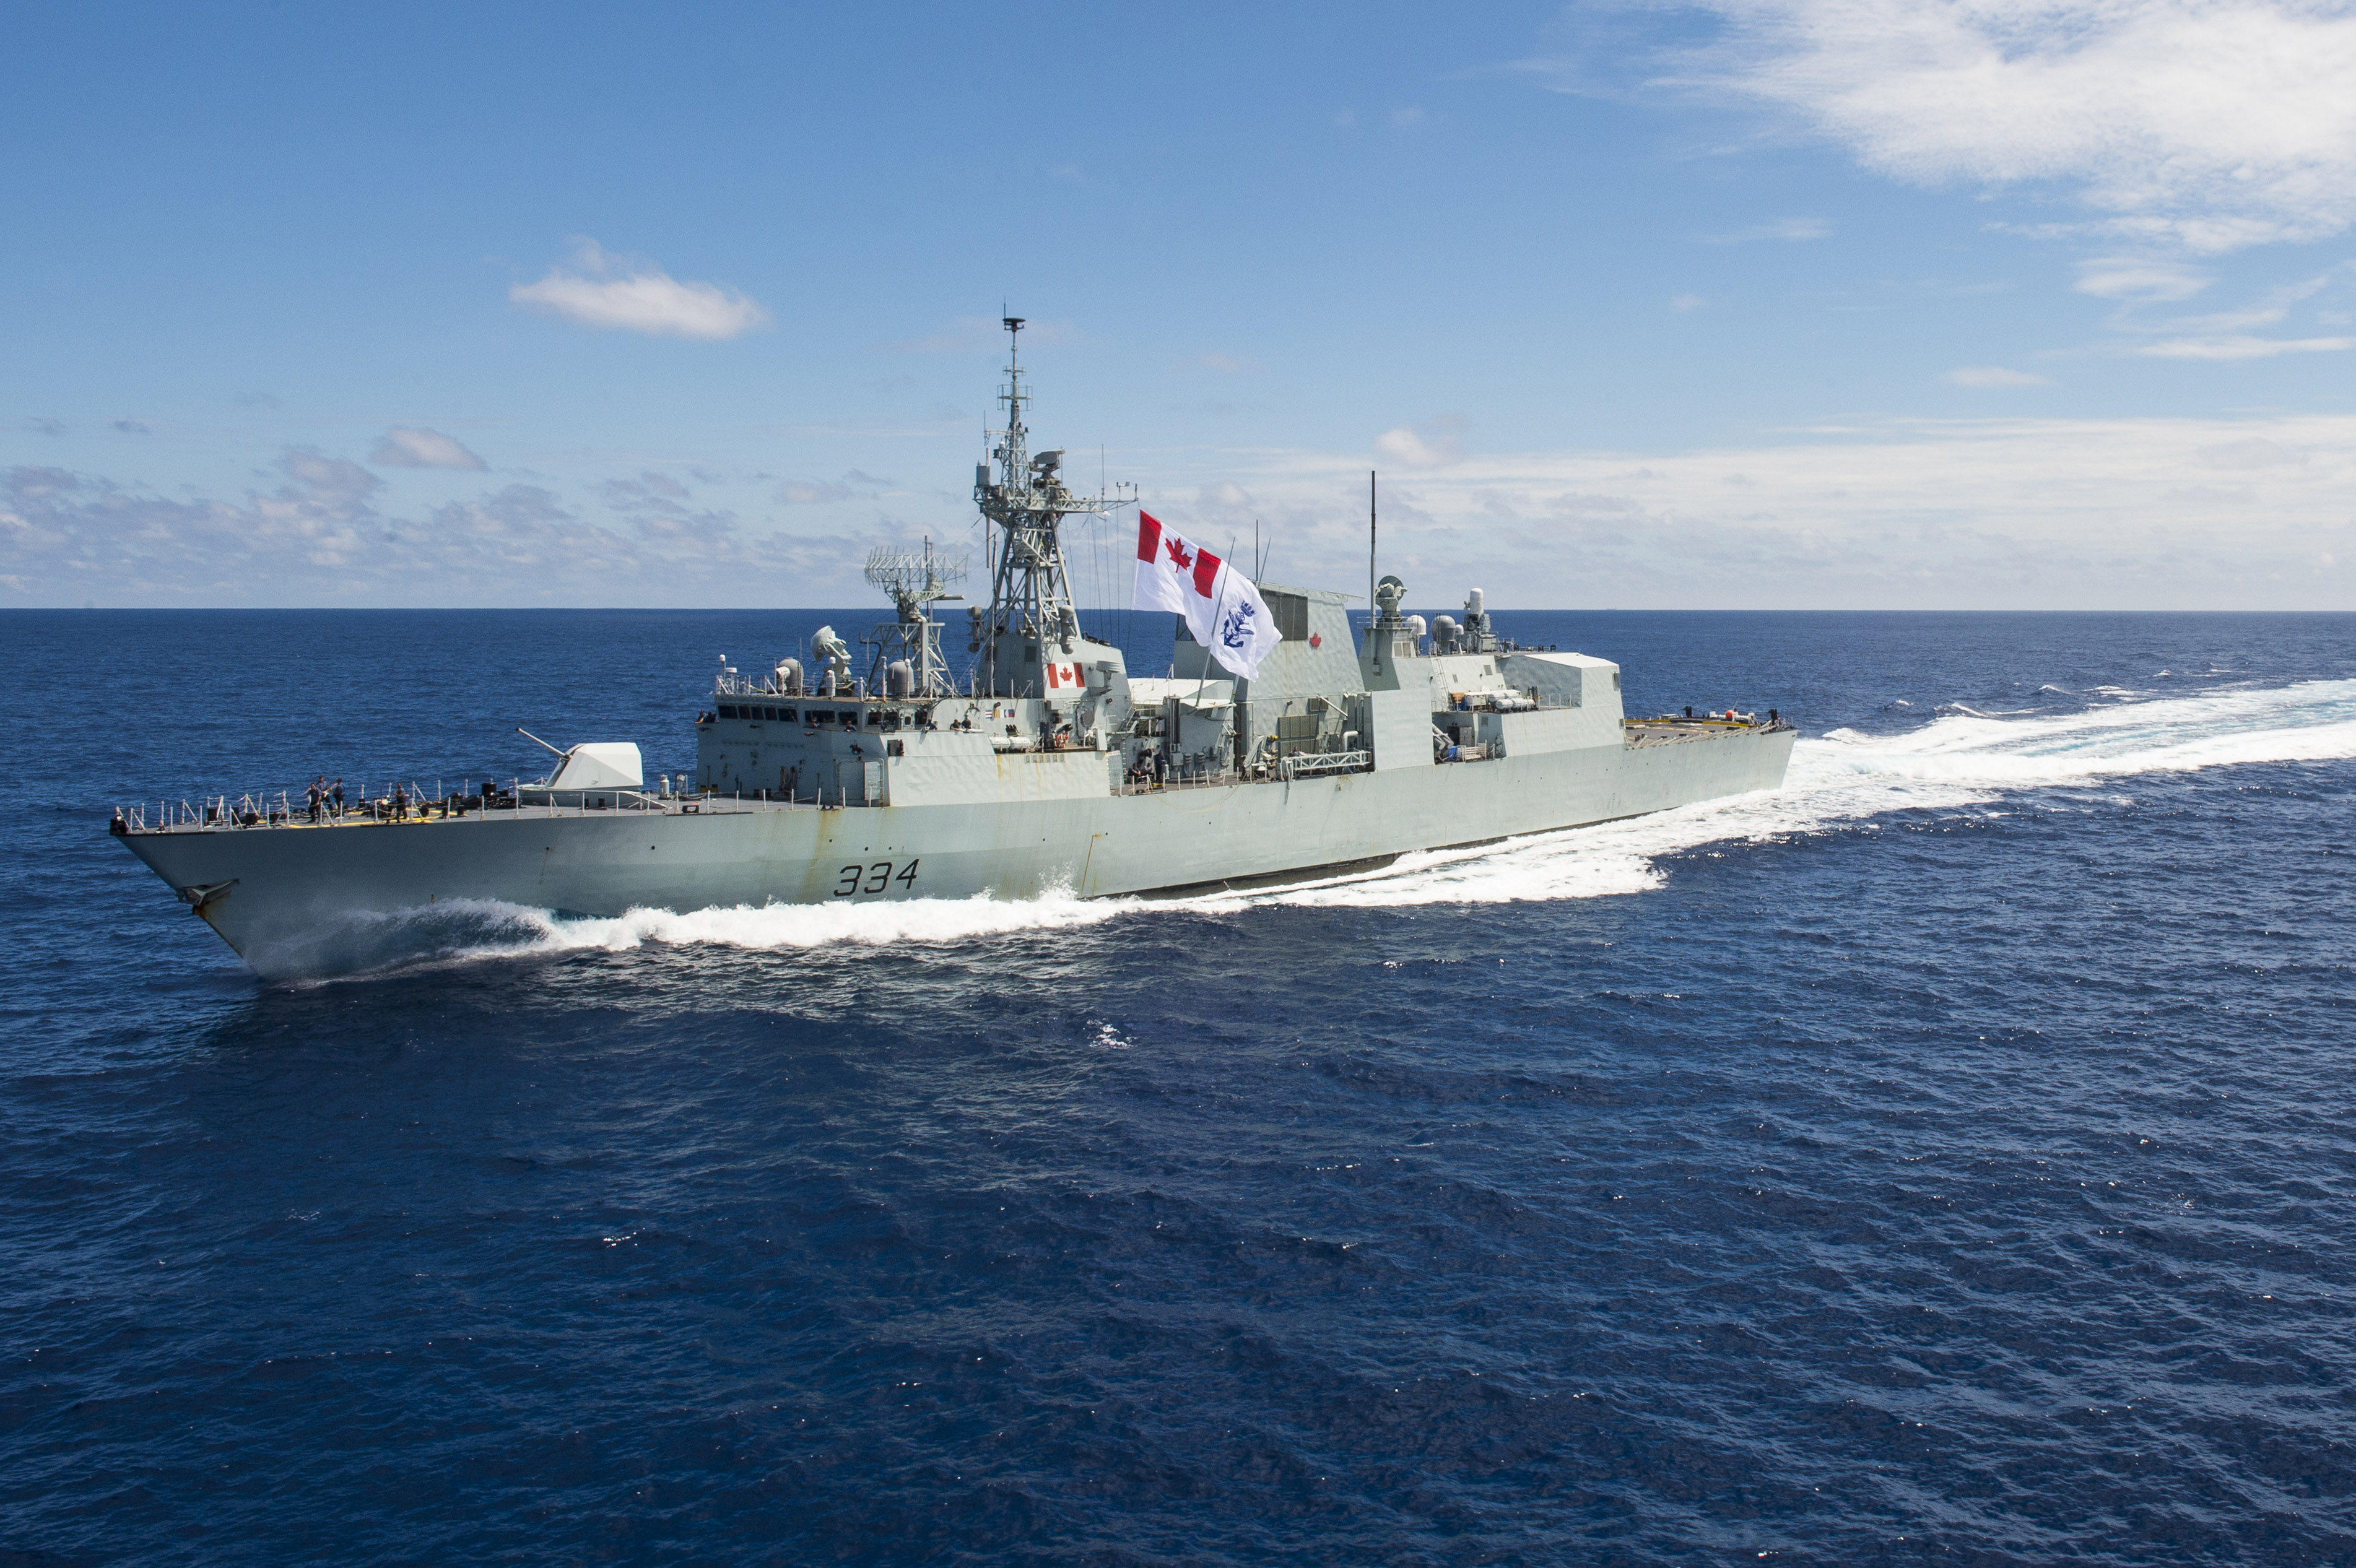 Canadian Navy Backgrounds, Compatible - PC, Mobile, Gadgets| 3805x2533 px